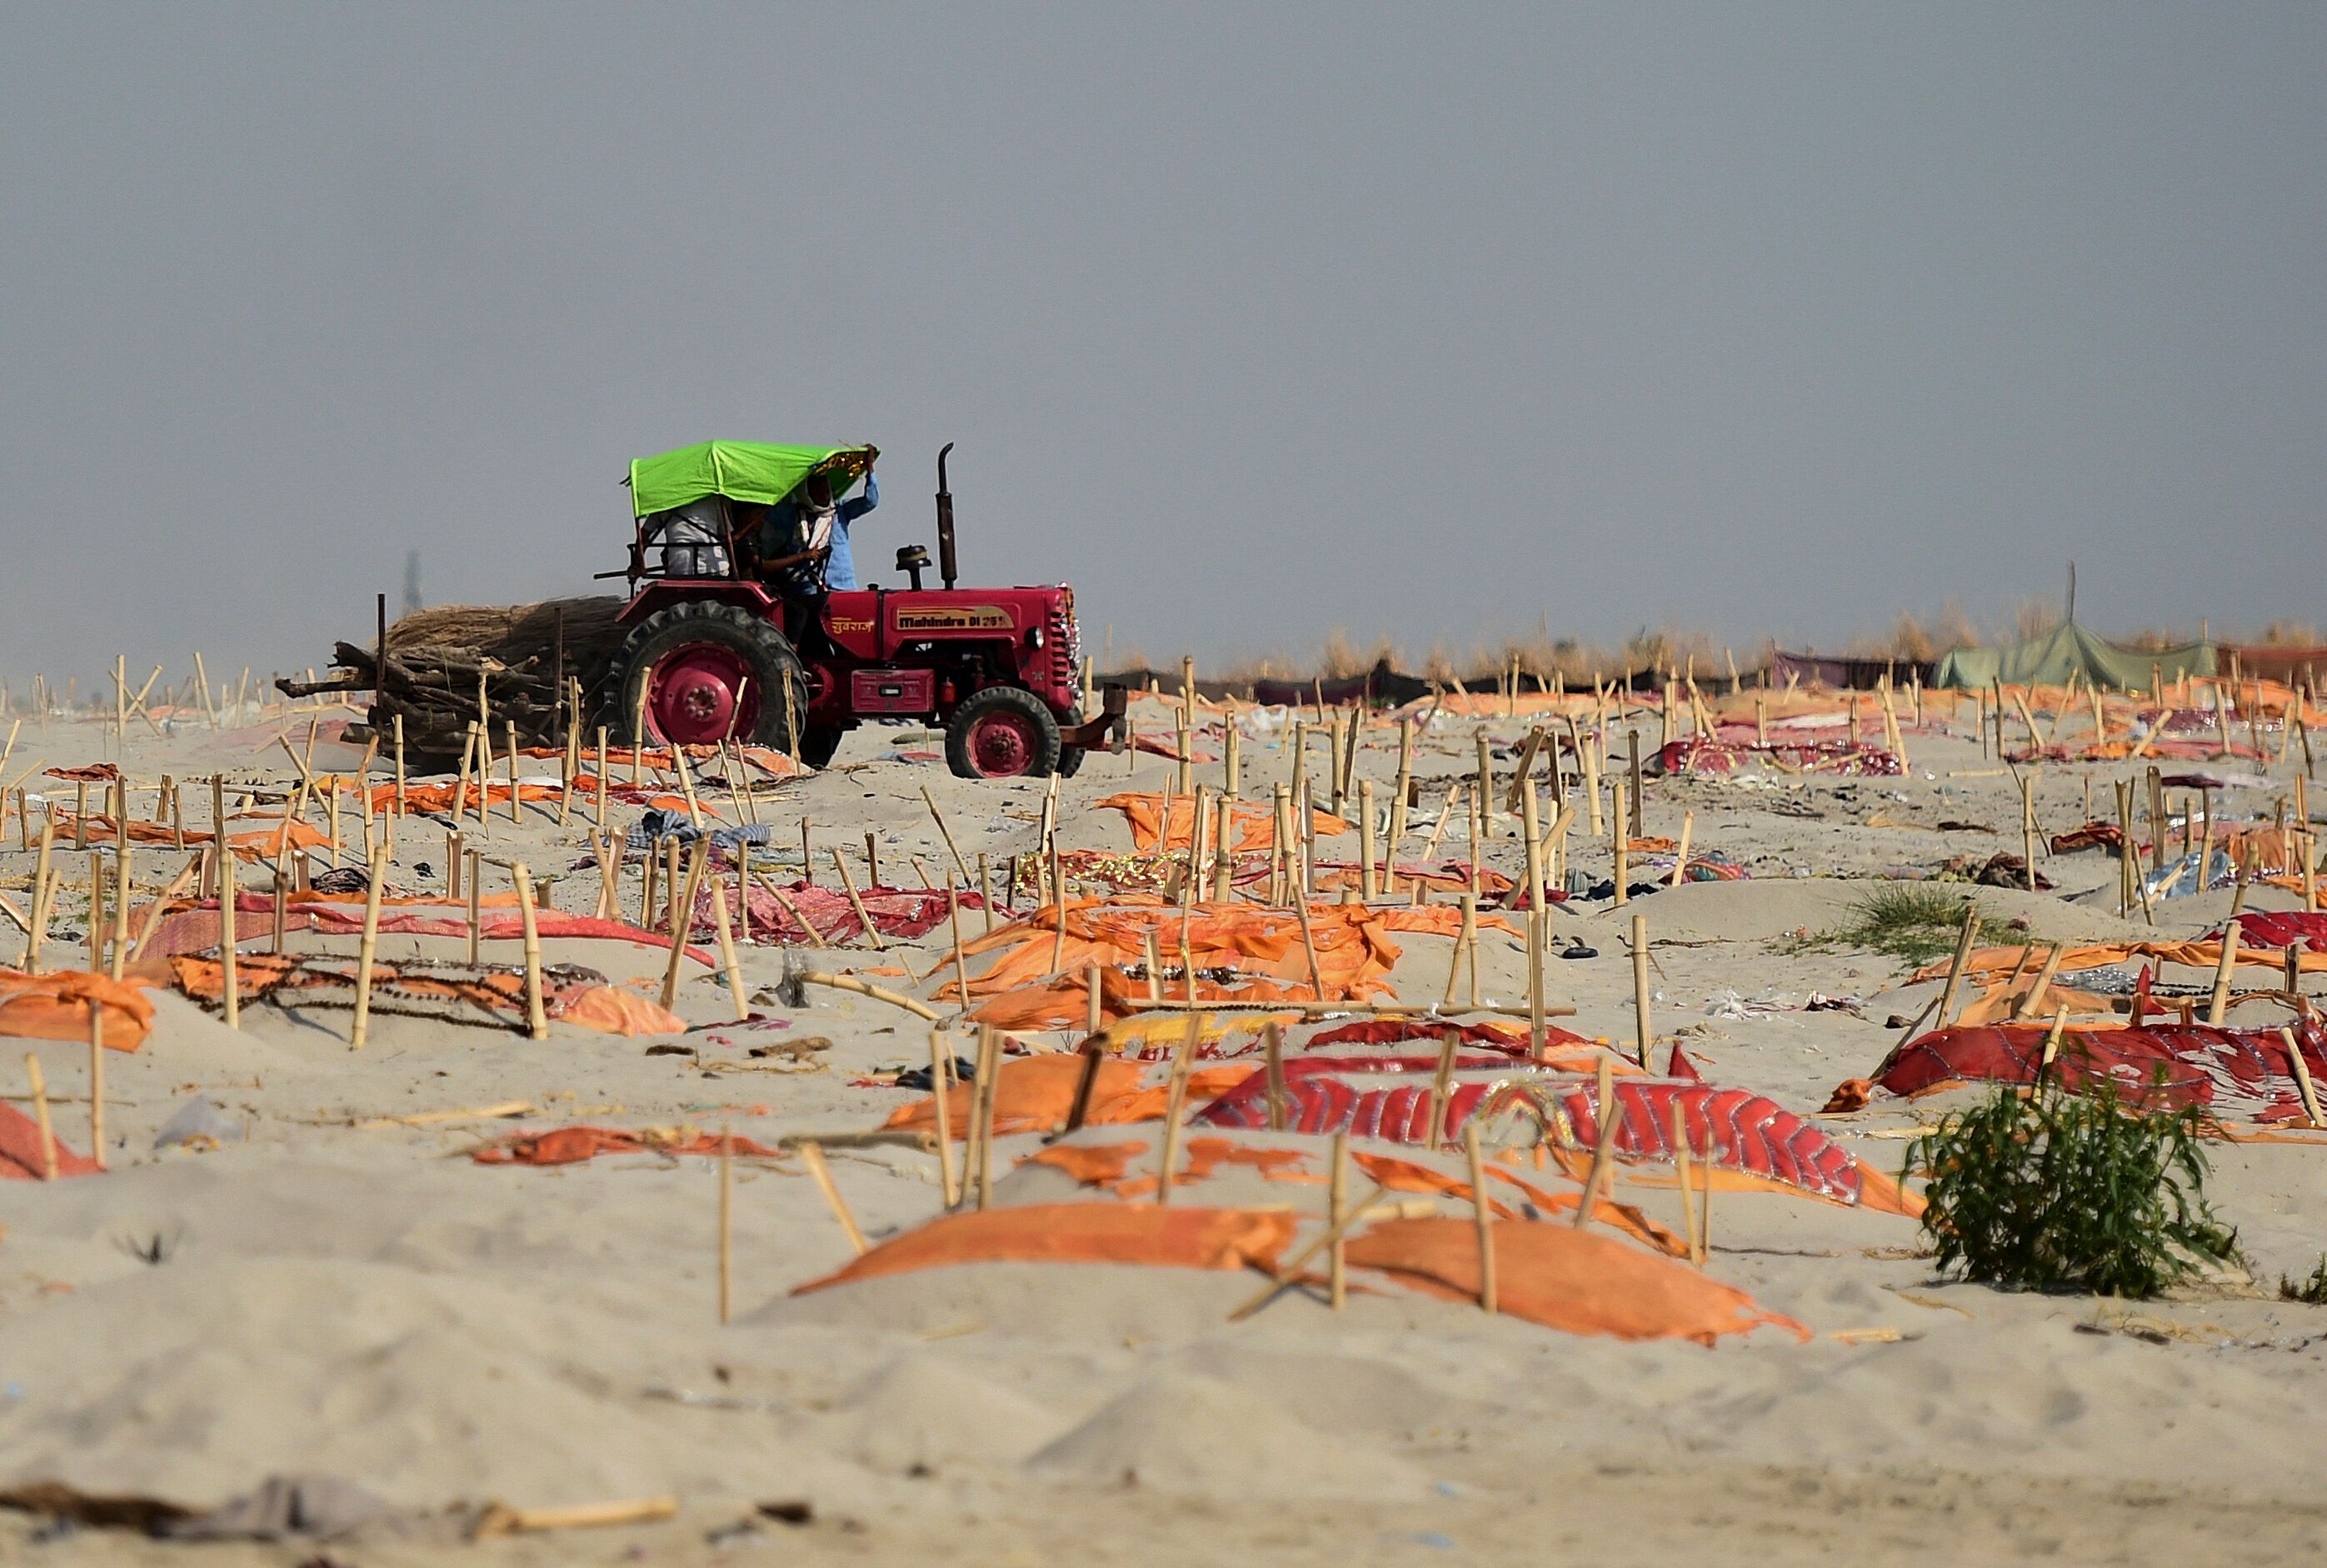 A tractor carries wood logs for cremations past shallow graves on the banks of the Ganges River.